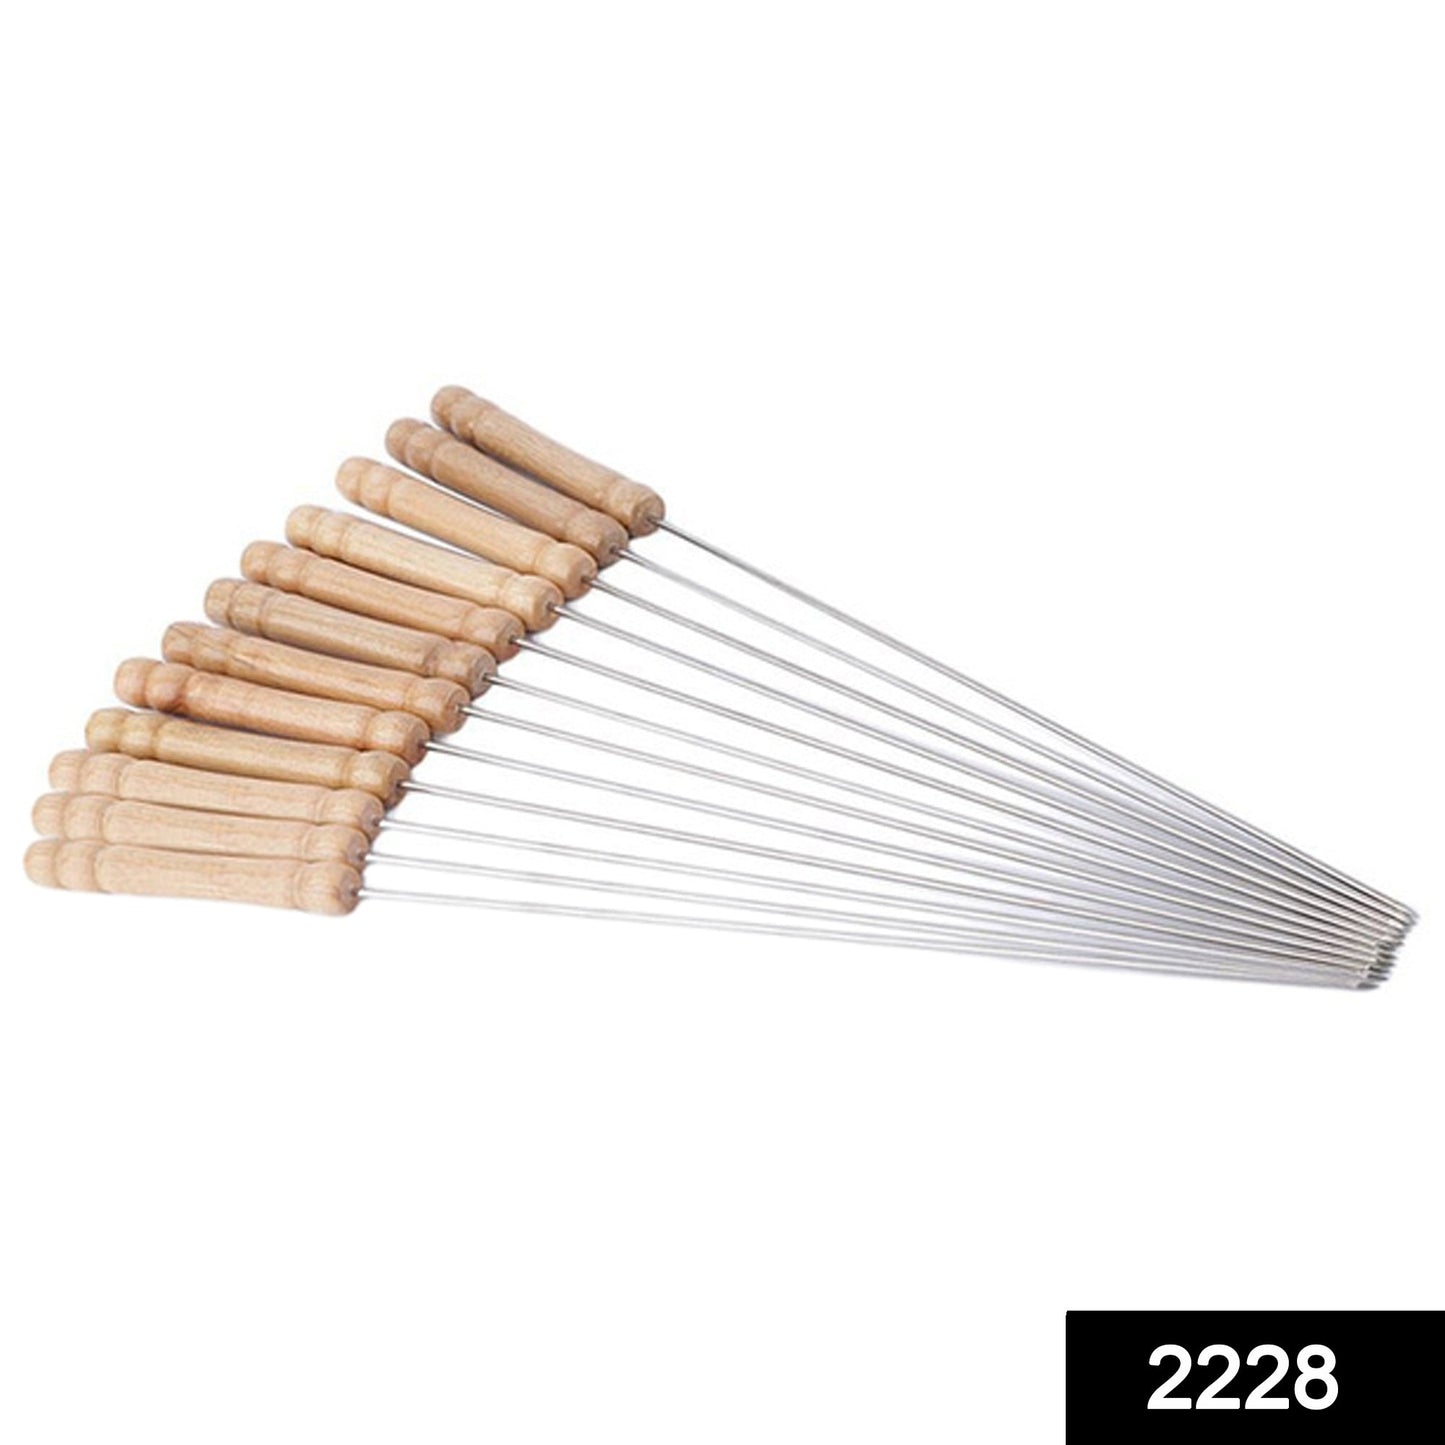 Barbecue Skewers for BBQ Tandoor and Gril with Wooden Handle - Pack of 12